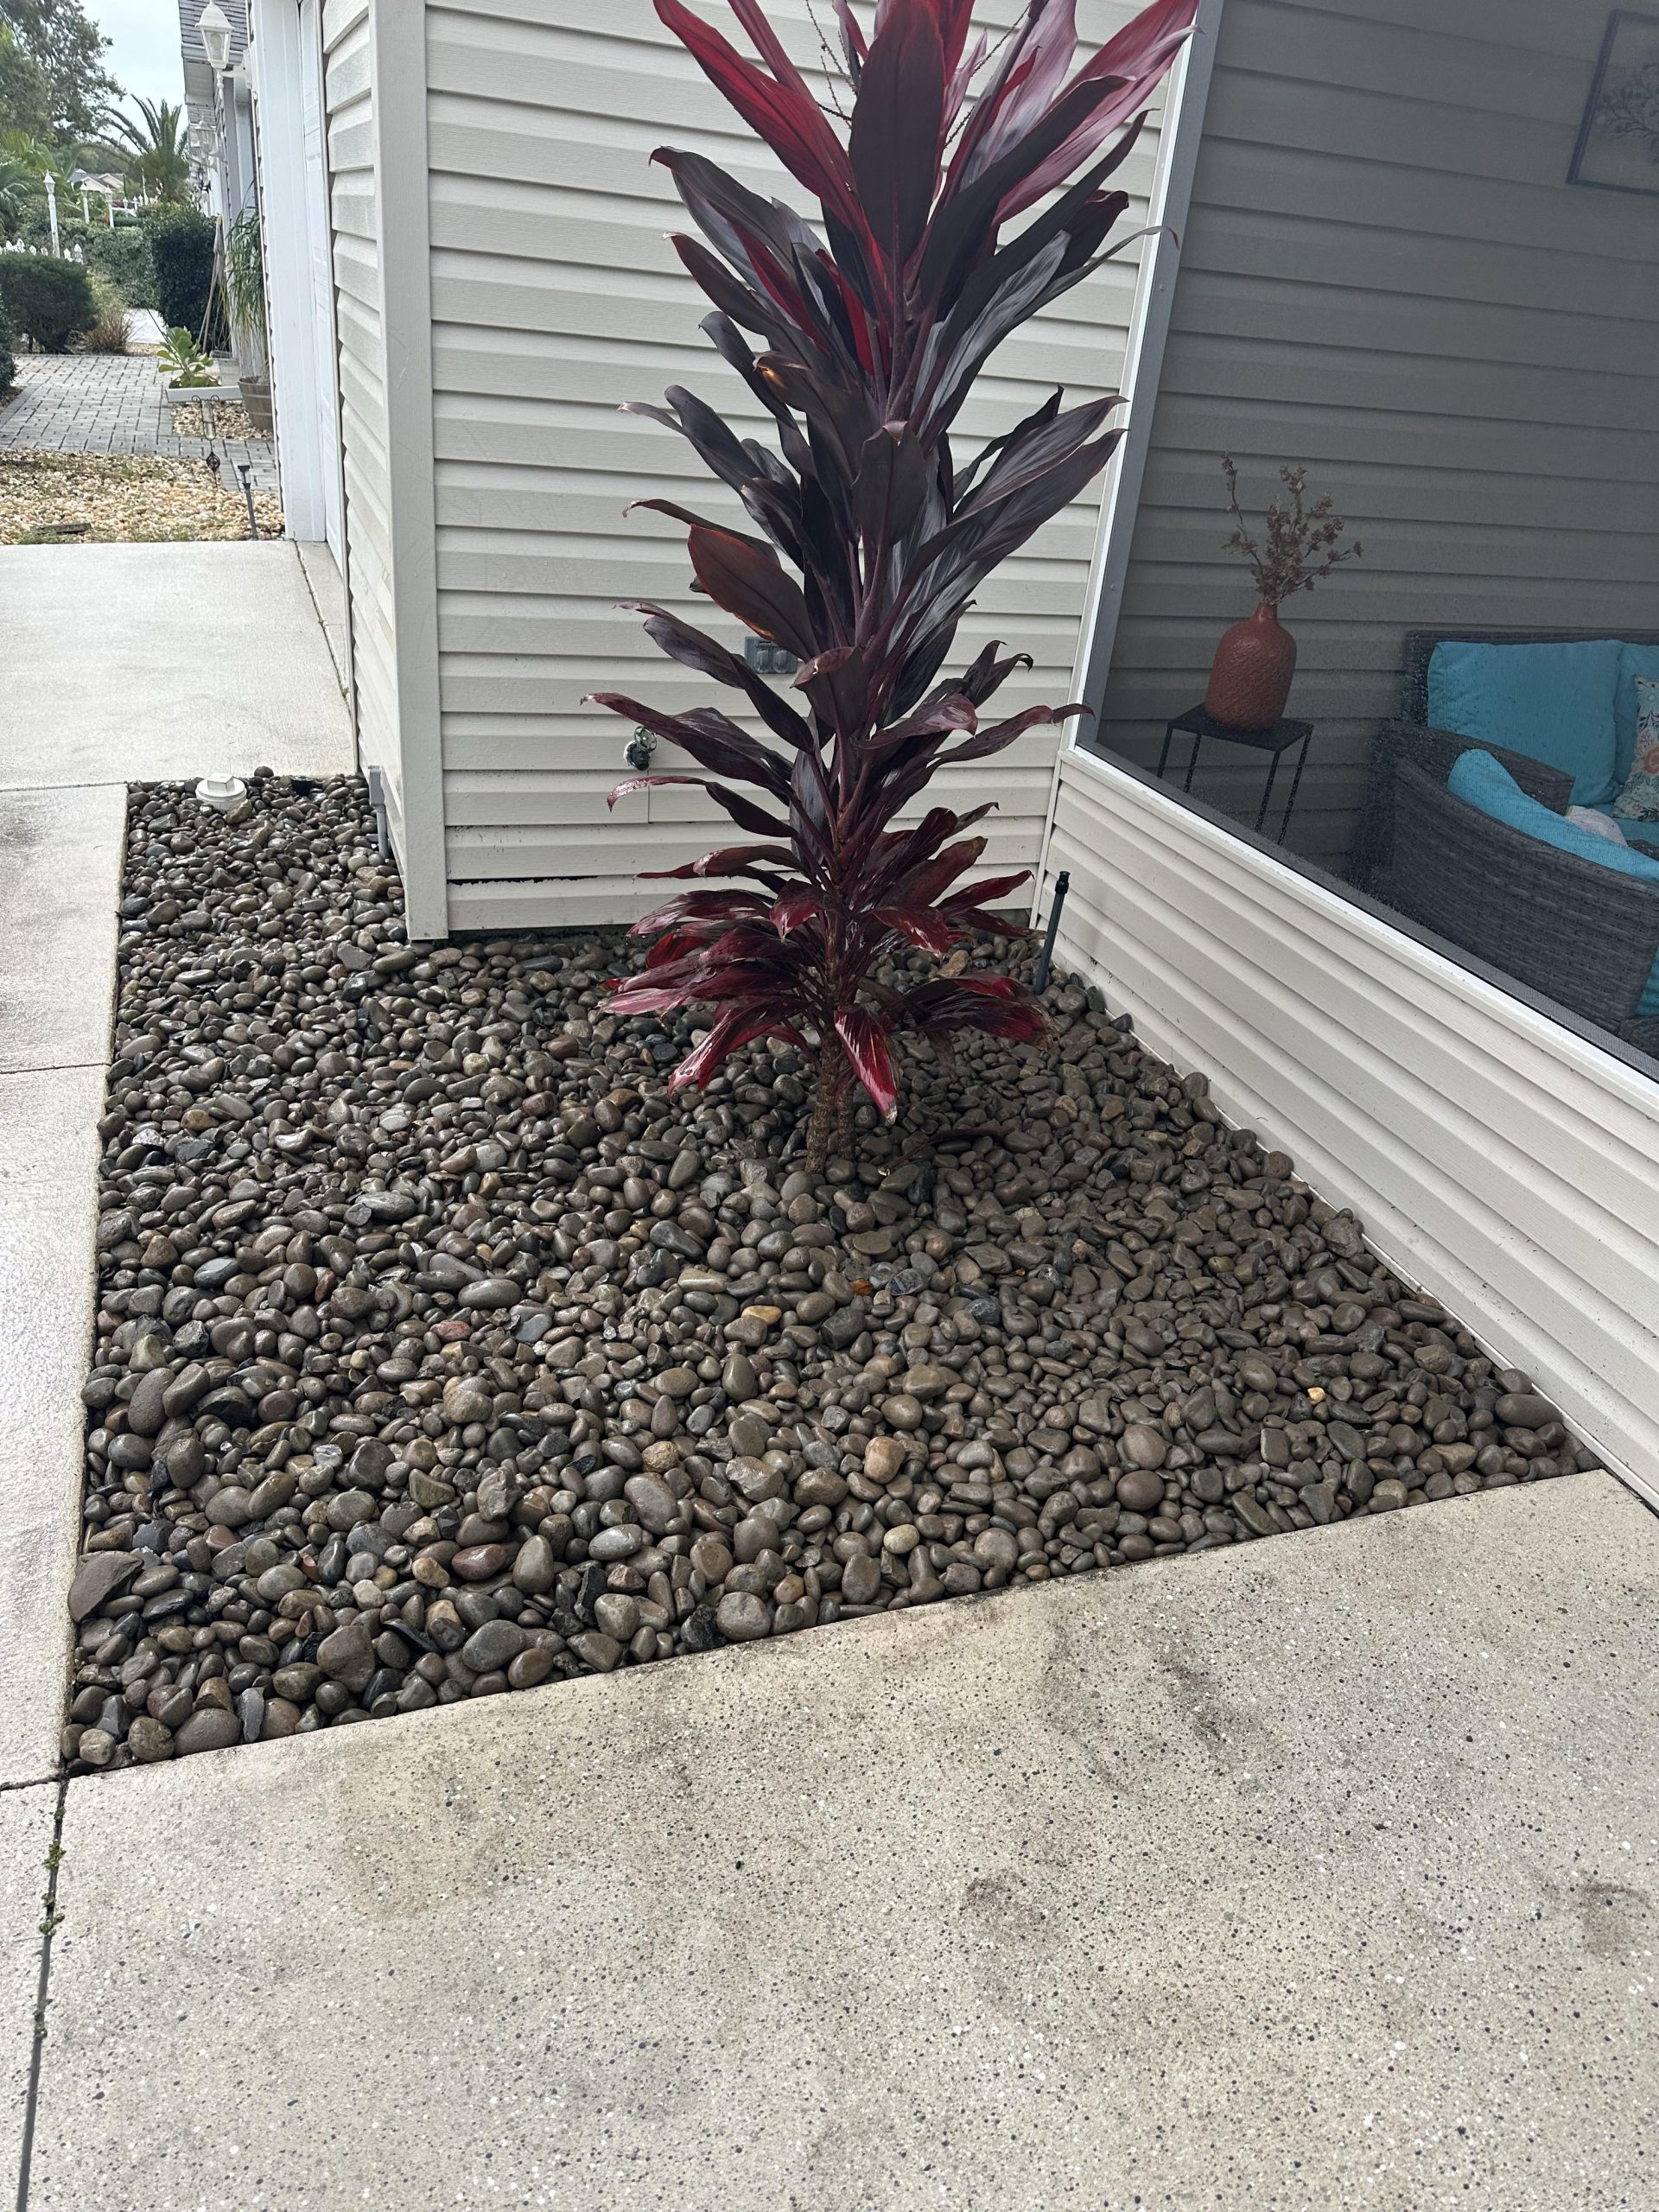 after rock was added to garden bed